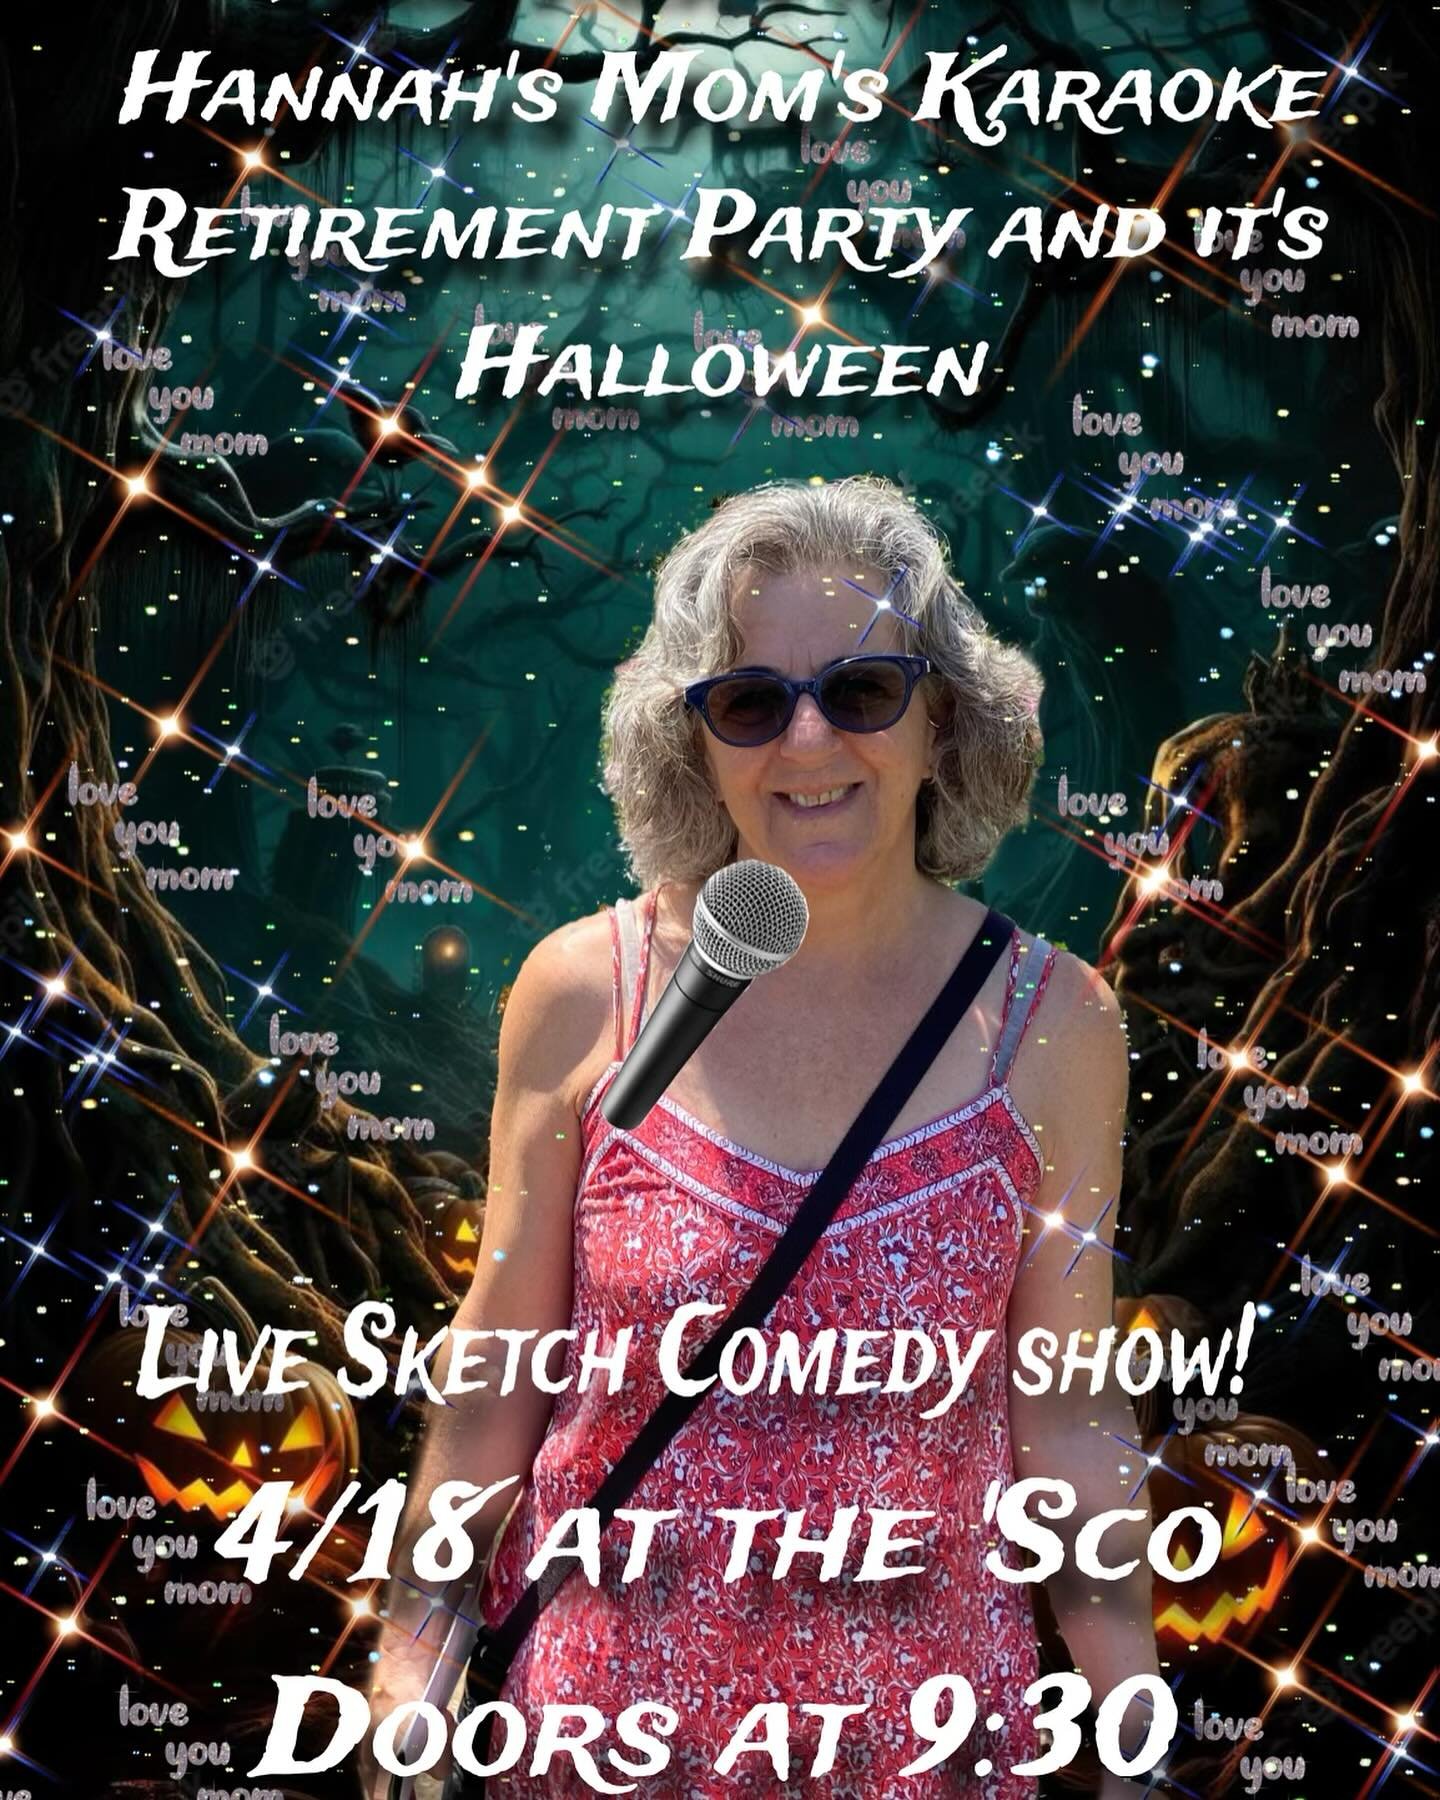 GOOD TALK PRESENTS: HANNAH&rsquo;S MOM&rsquo;S KARAOKE RETIREMENT PARTY AND IT&rsquo;S HALLOWEEN! Come do karaoke and watch incredible comedy from Oberlin&rsquo;s oldest sketch comedy group! THIS THURSDAY AT THE SCO! DOORS OPEN 9:30, SHOW STARTS AT 1